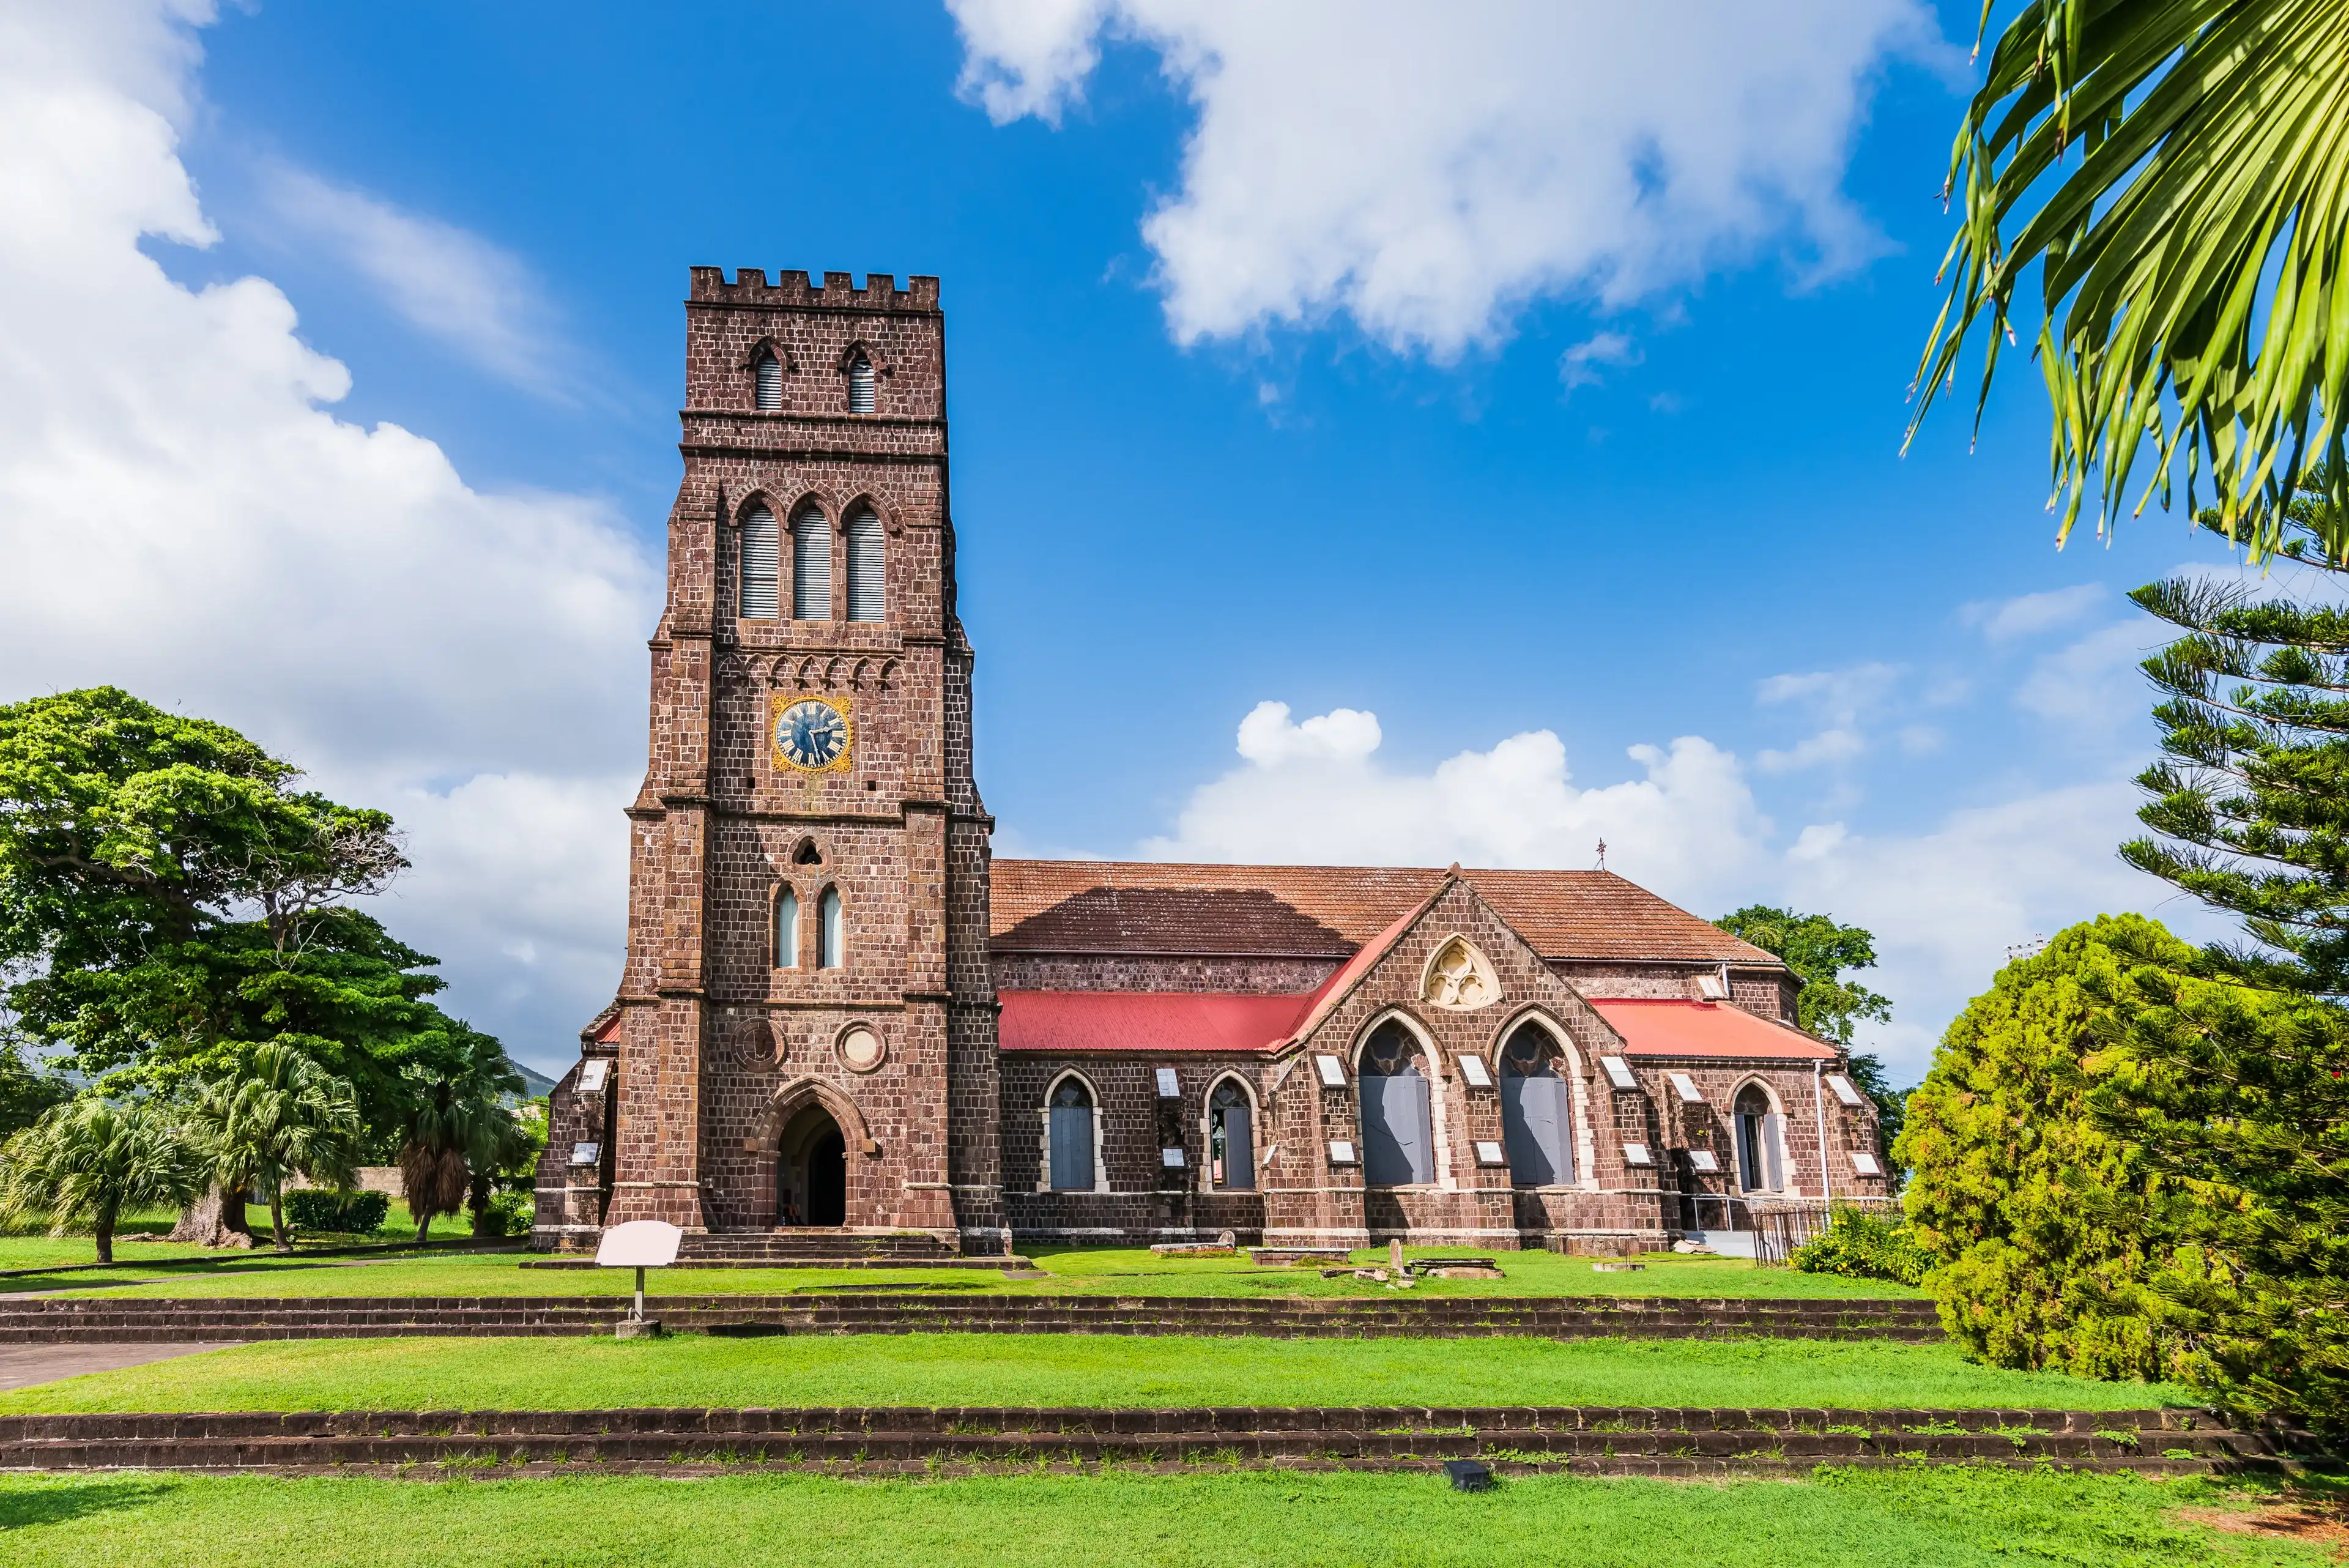 St. George's Anglican Church in Basseterre, Saint Kitts and Nevis.